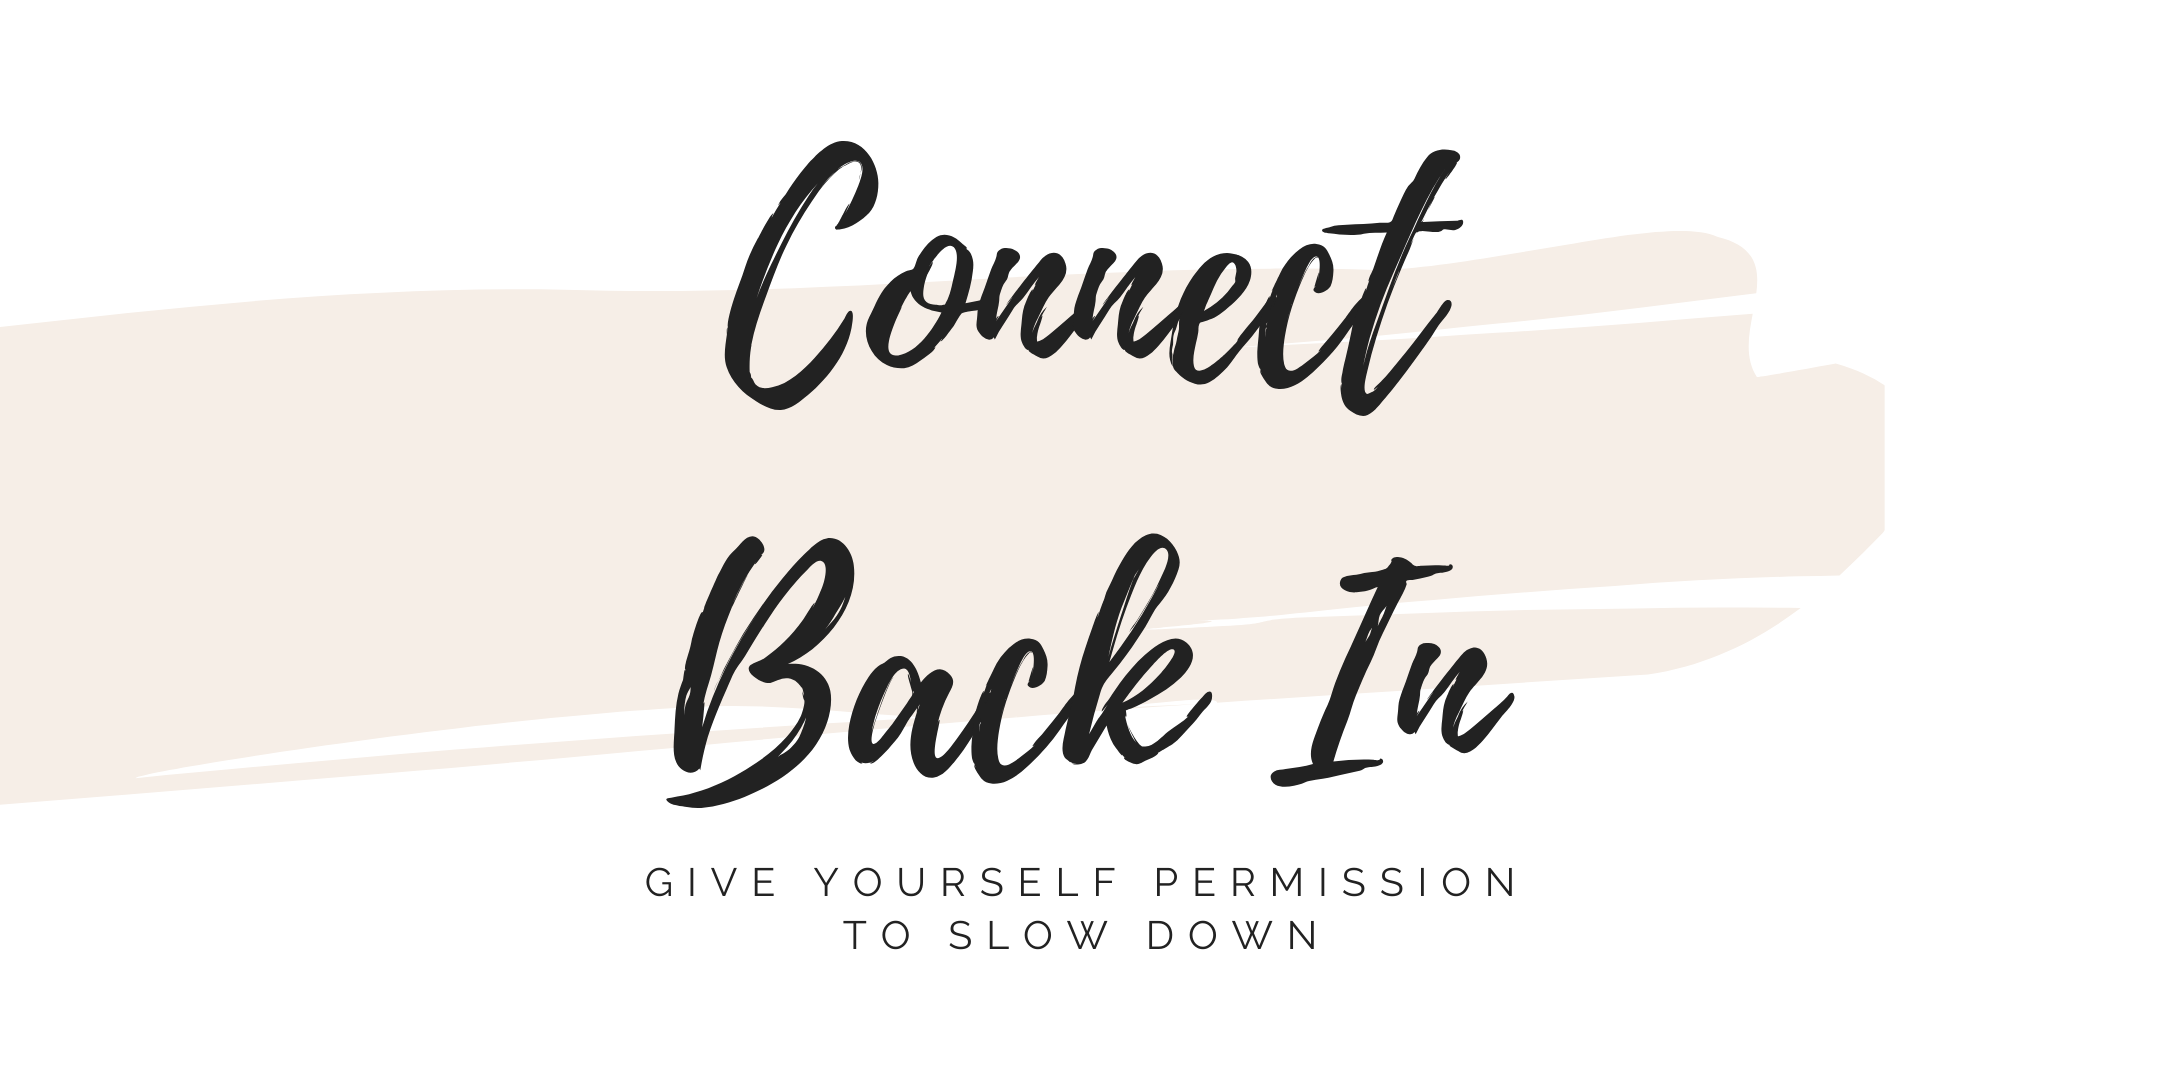 Connect Back In Event: Give Yourself Permission to Slow Down